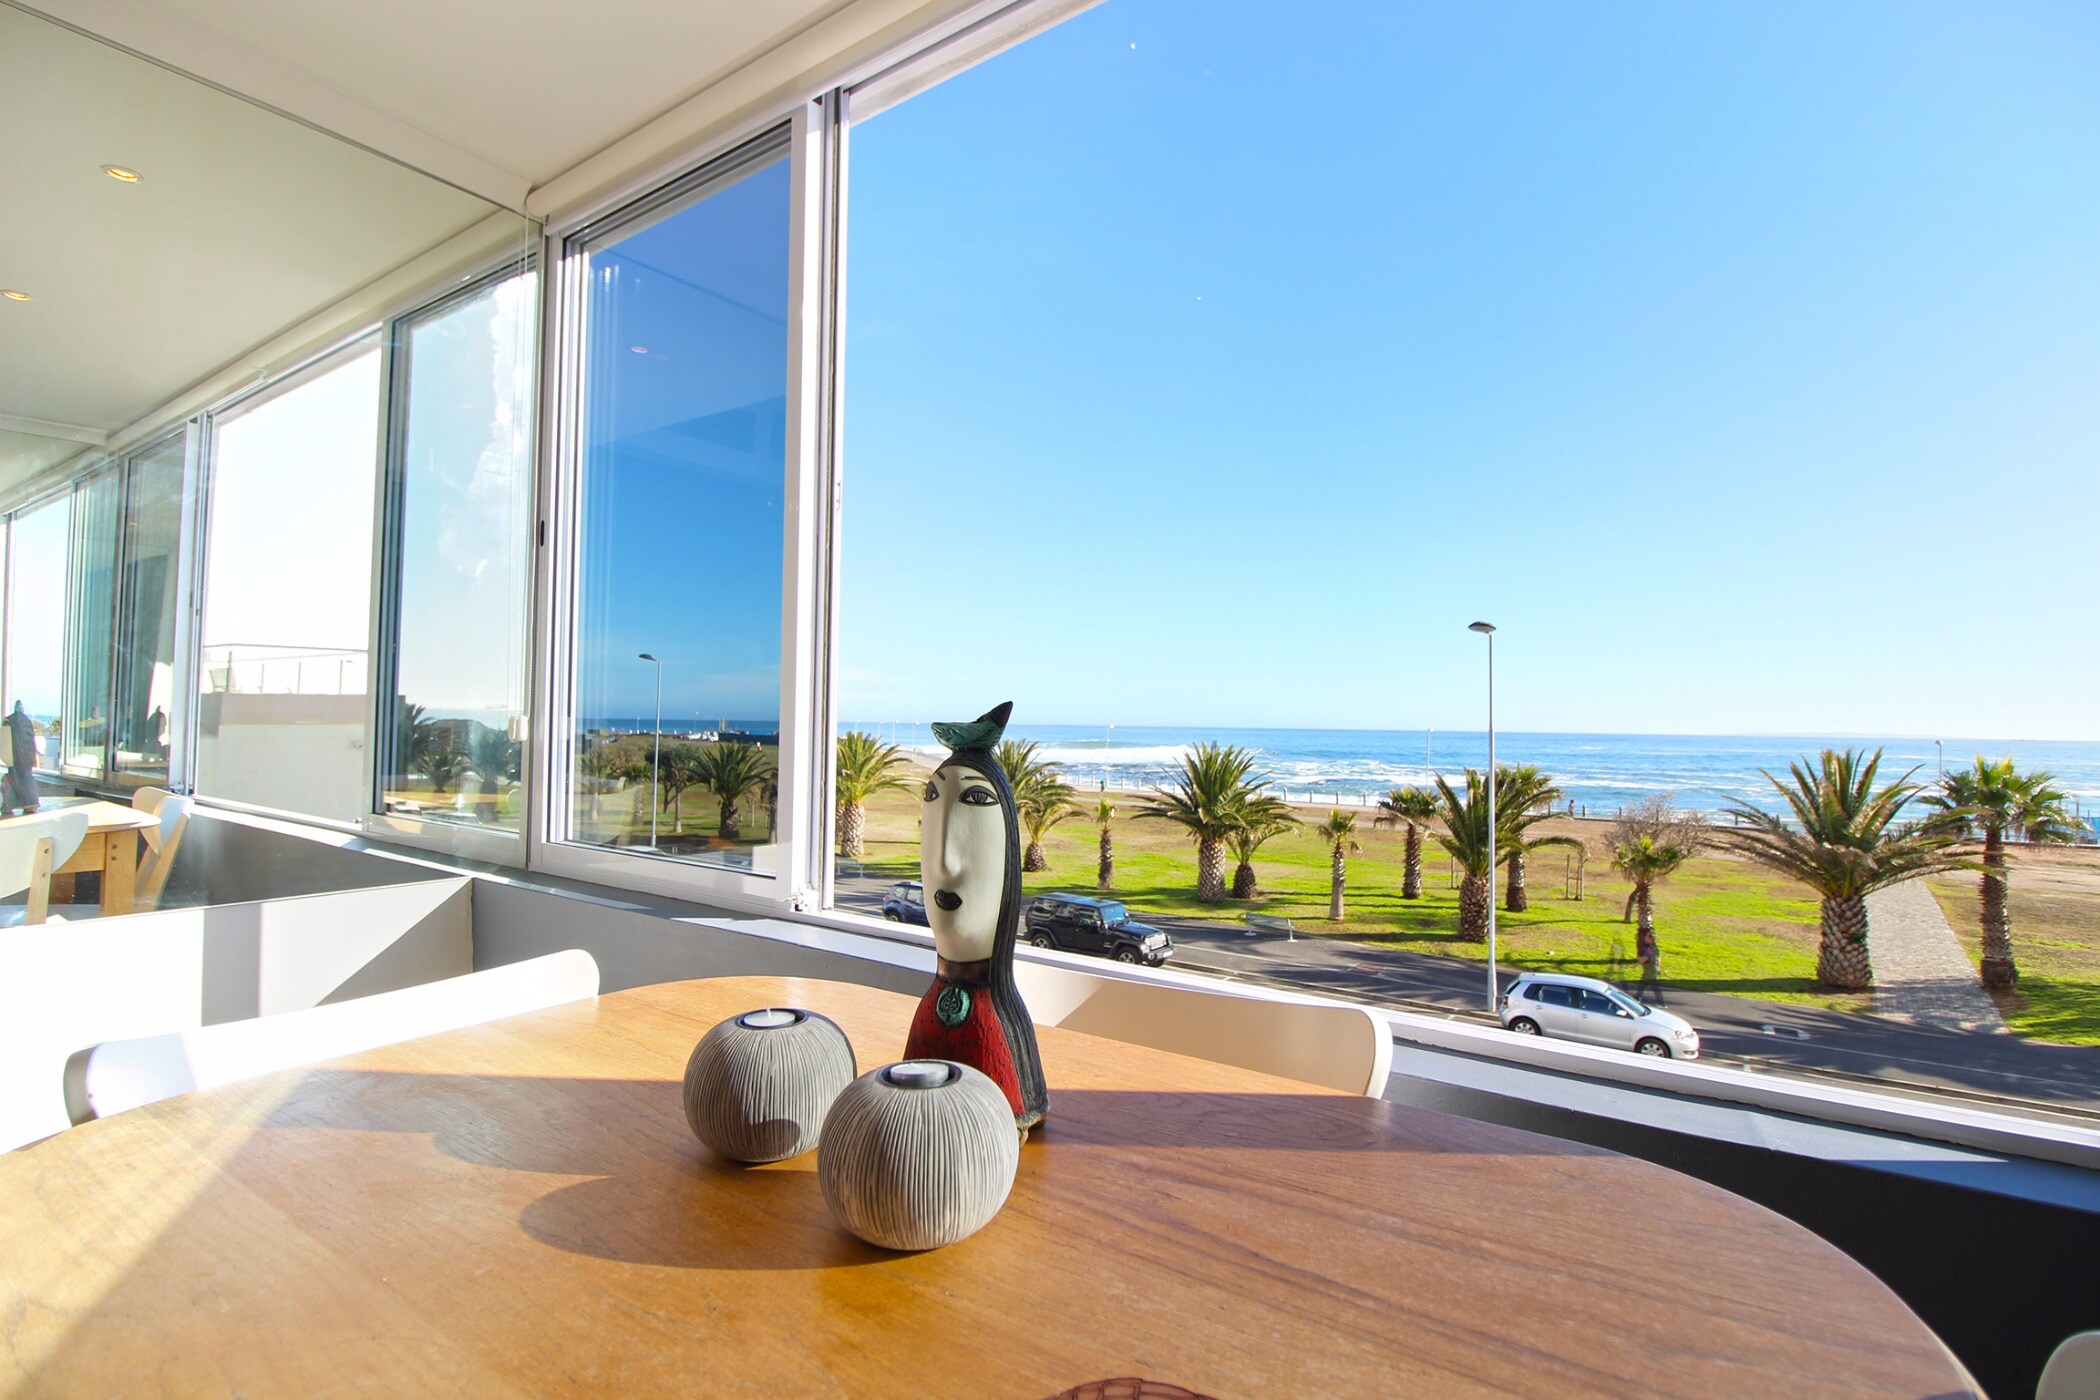 Property Image 1 - Beautiful  Stylish Beachfront with Gorgeous Views of the Ocean